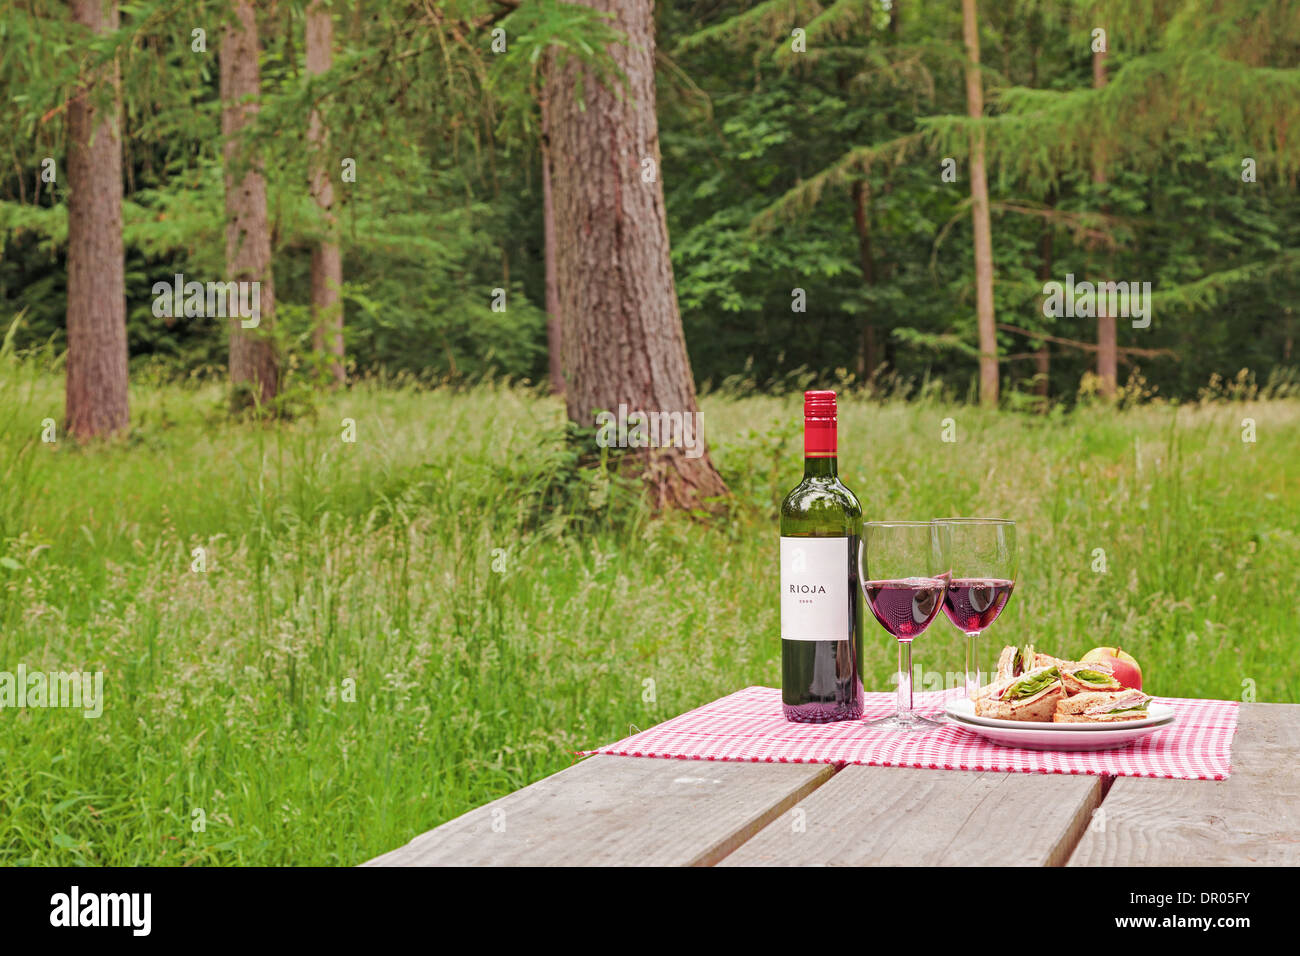 Alfresco dining with a bottle of wine, two glasses and sandwiches on a picnic table in woodland setting. Stock Photo